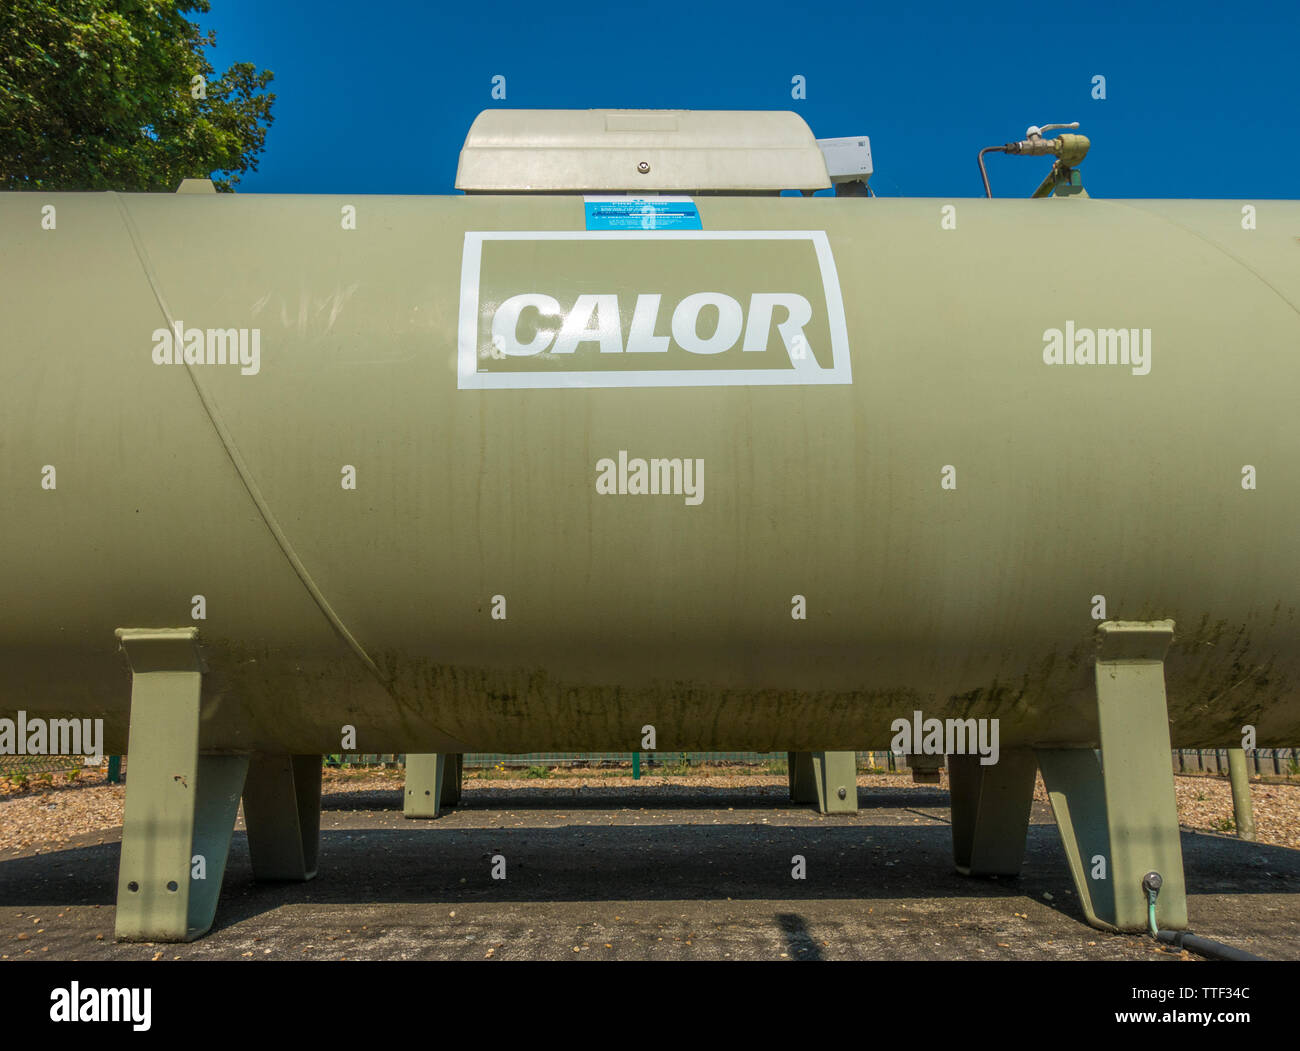 A large above ground Calor Gas LPG propane tank, being used as a fuel supply by a campsite, standing against a blue sky. England, UK. Stock Photo